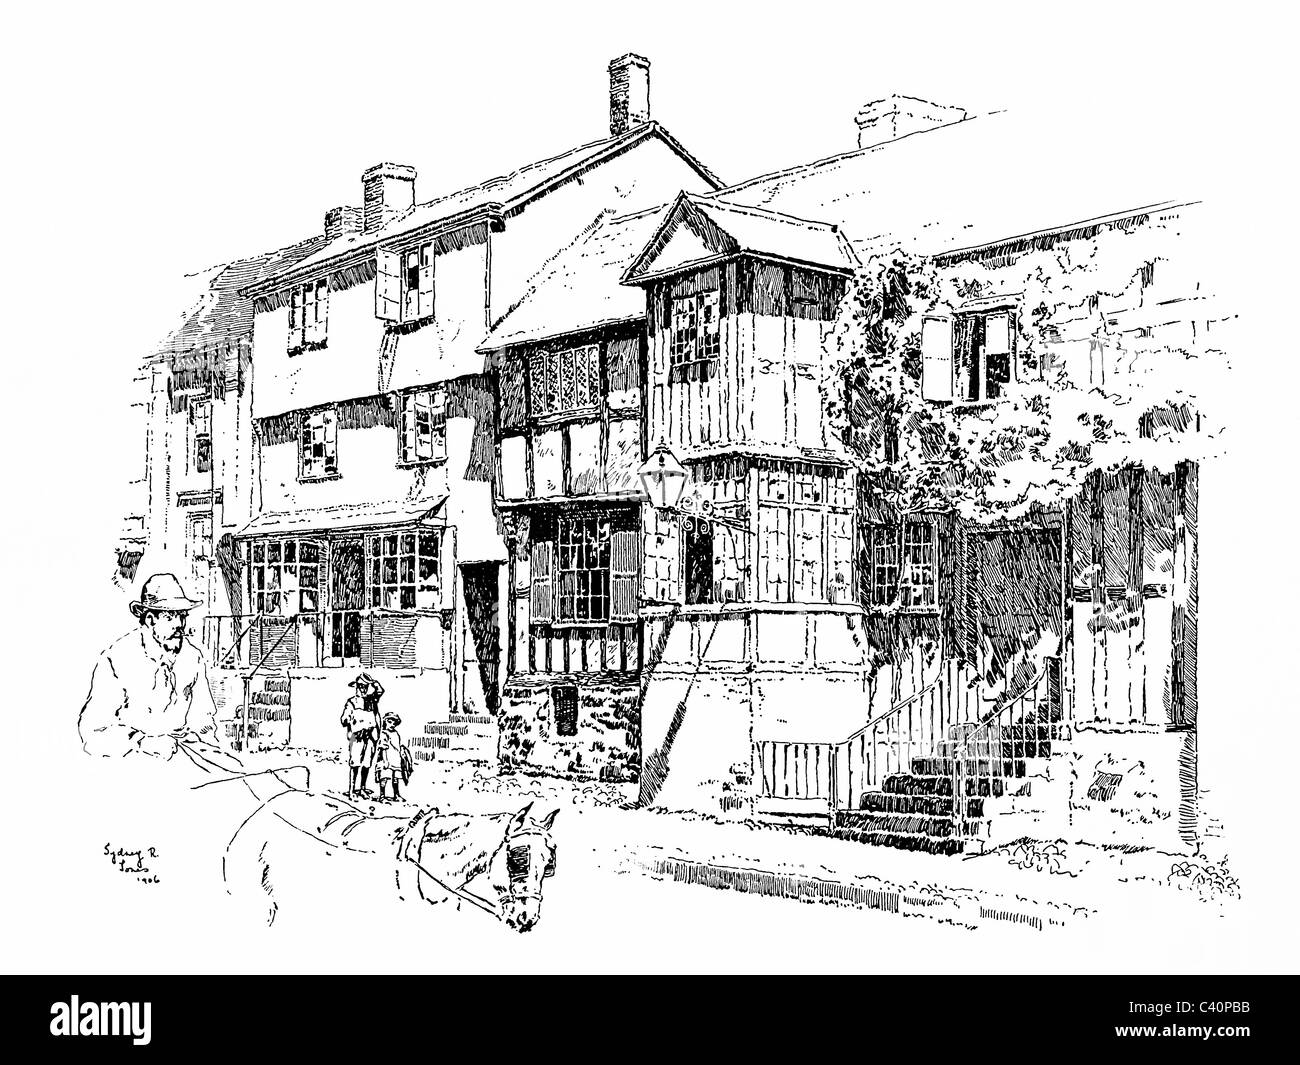 Ledbury, Herefordshire - pen and ink illustration from 'Old English Country Cottages' by Charles Holme, 1906. Stock Photo